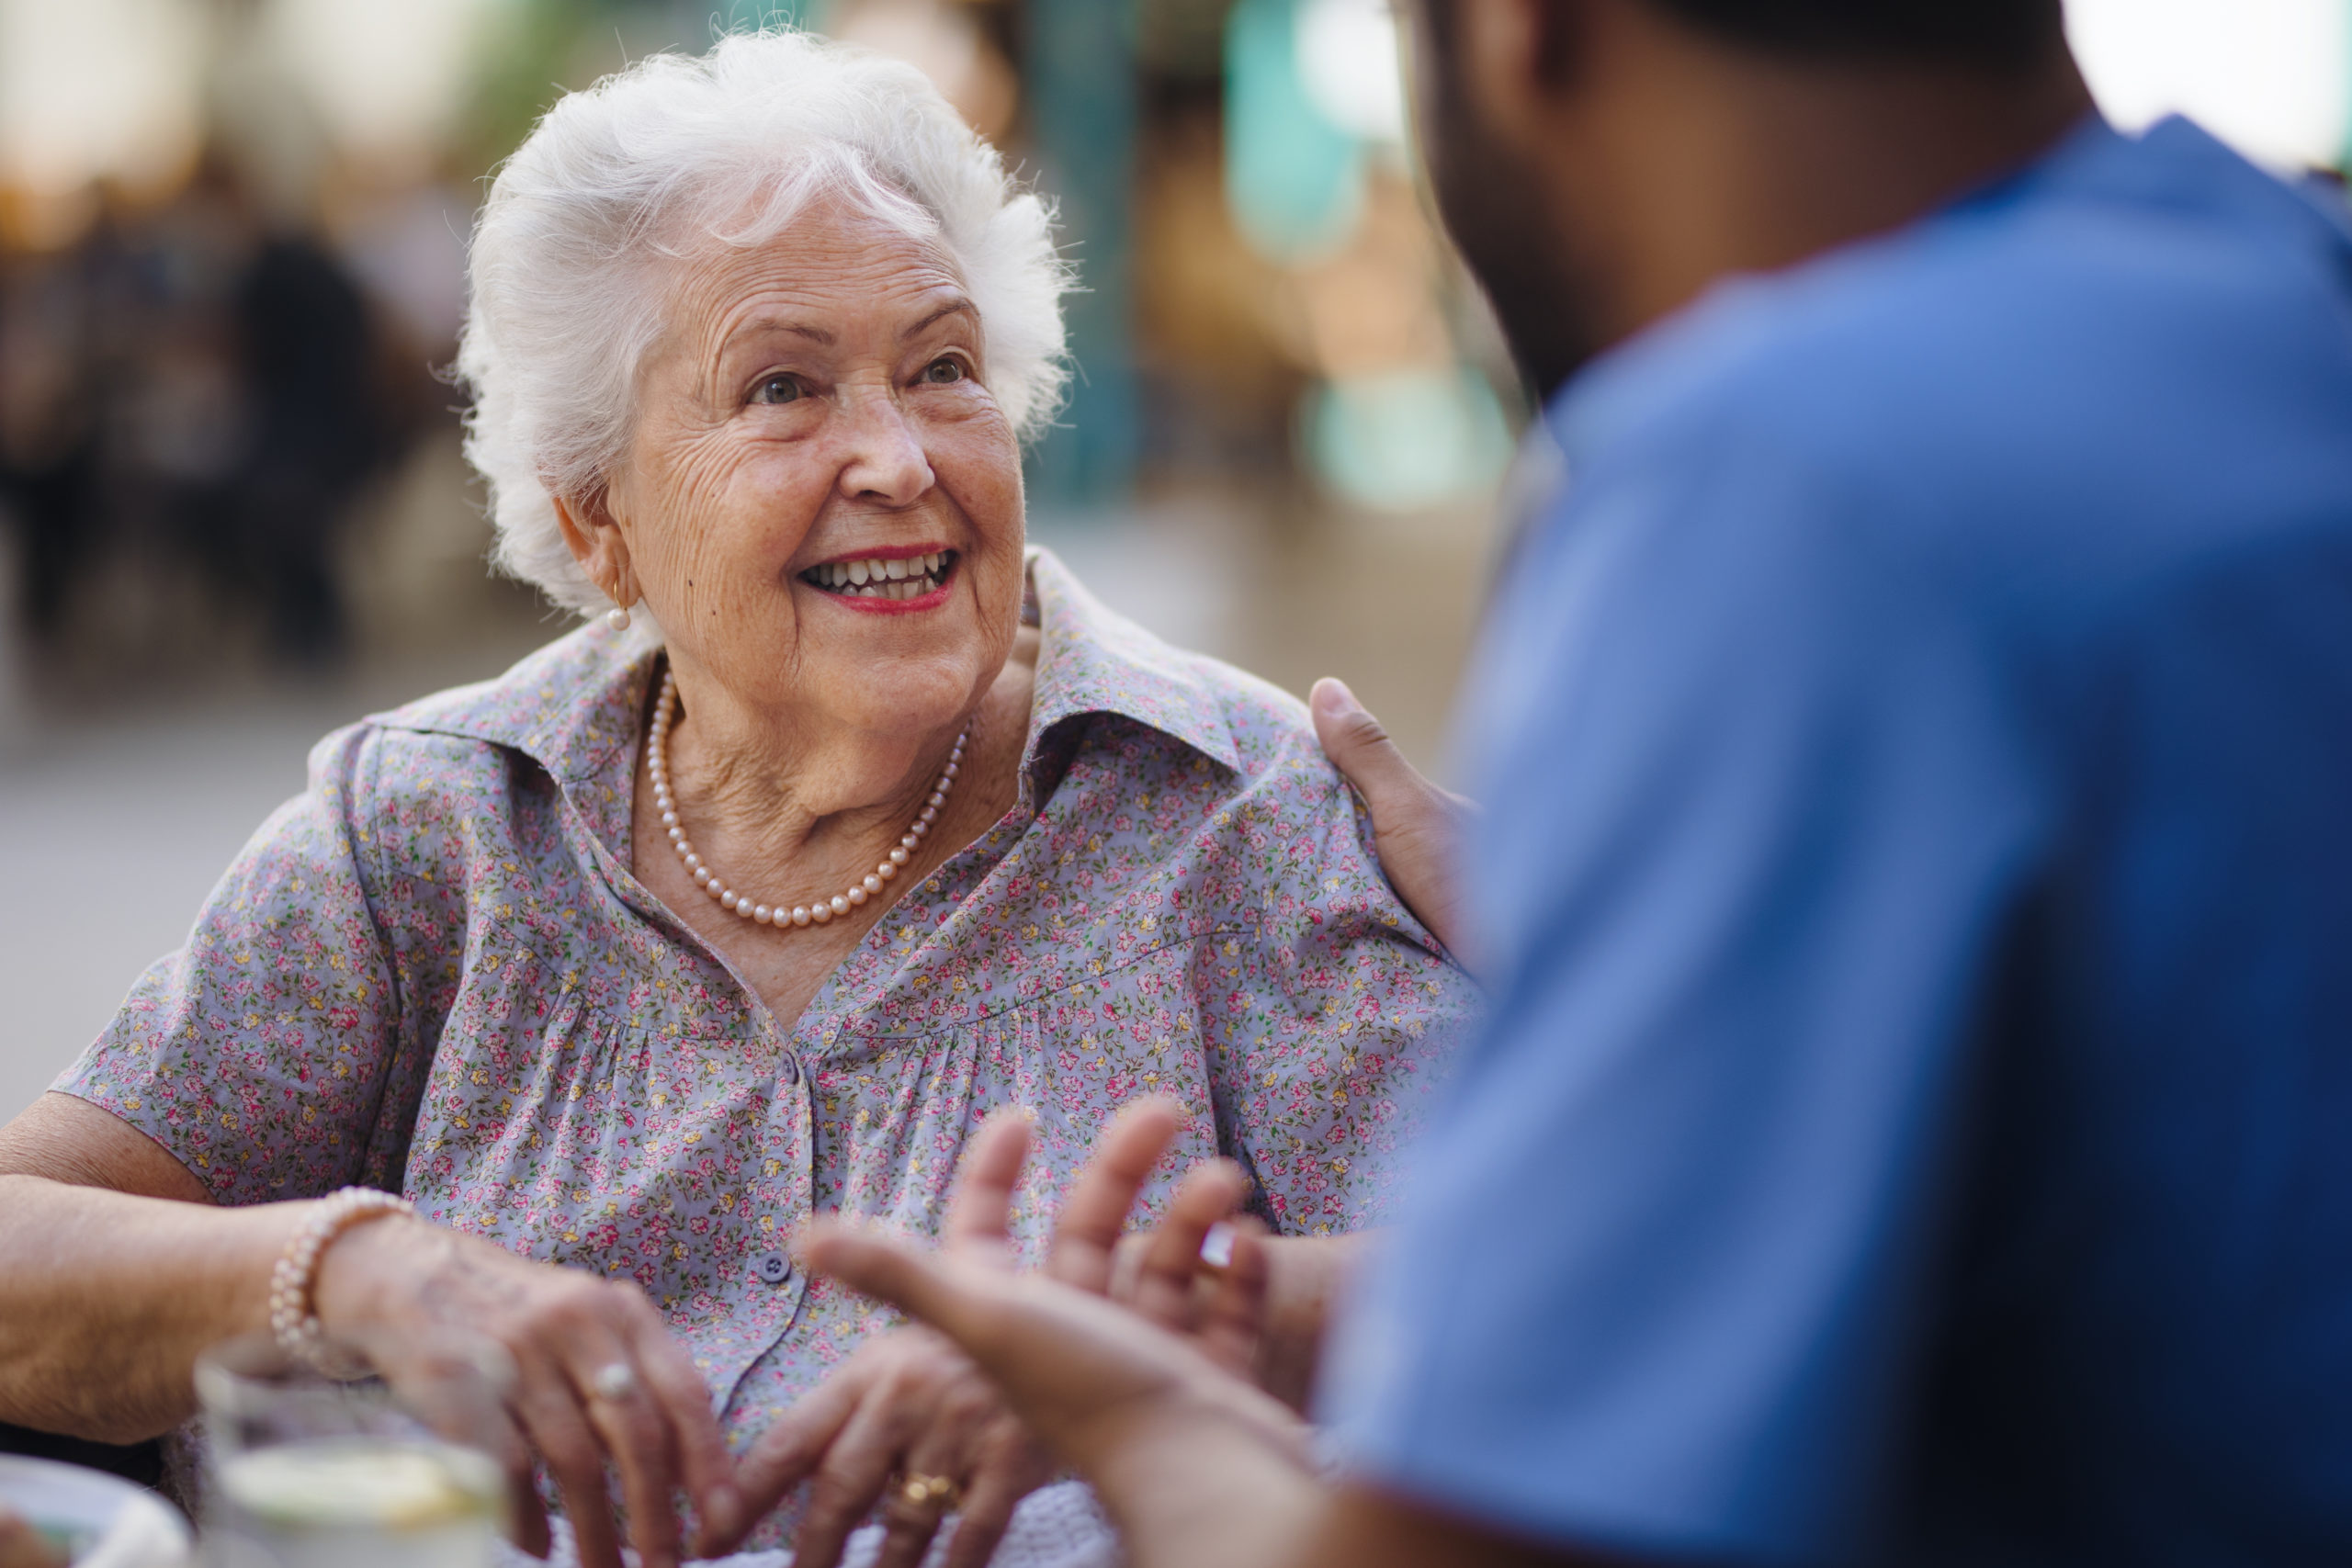 An elderly woman talking to a caregiver